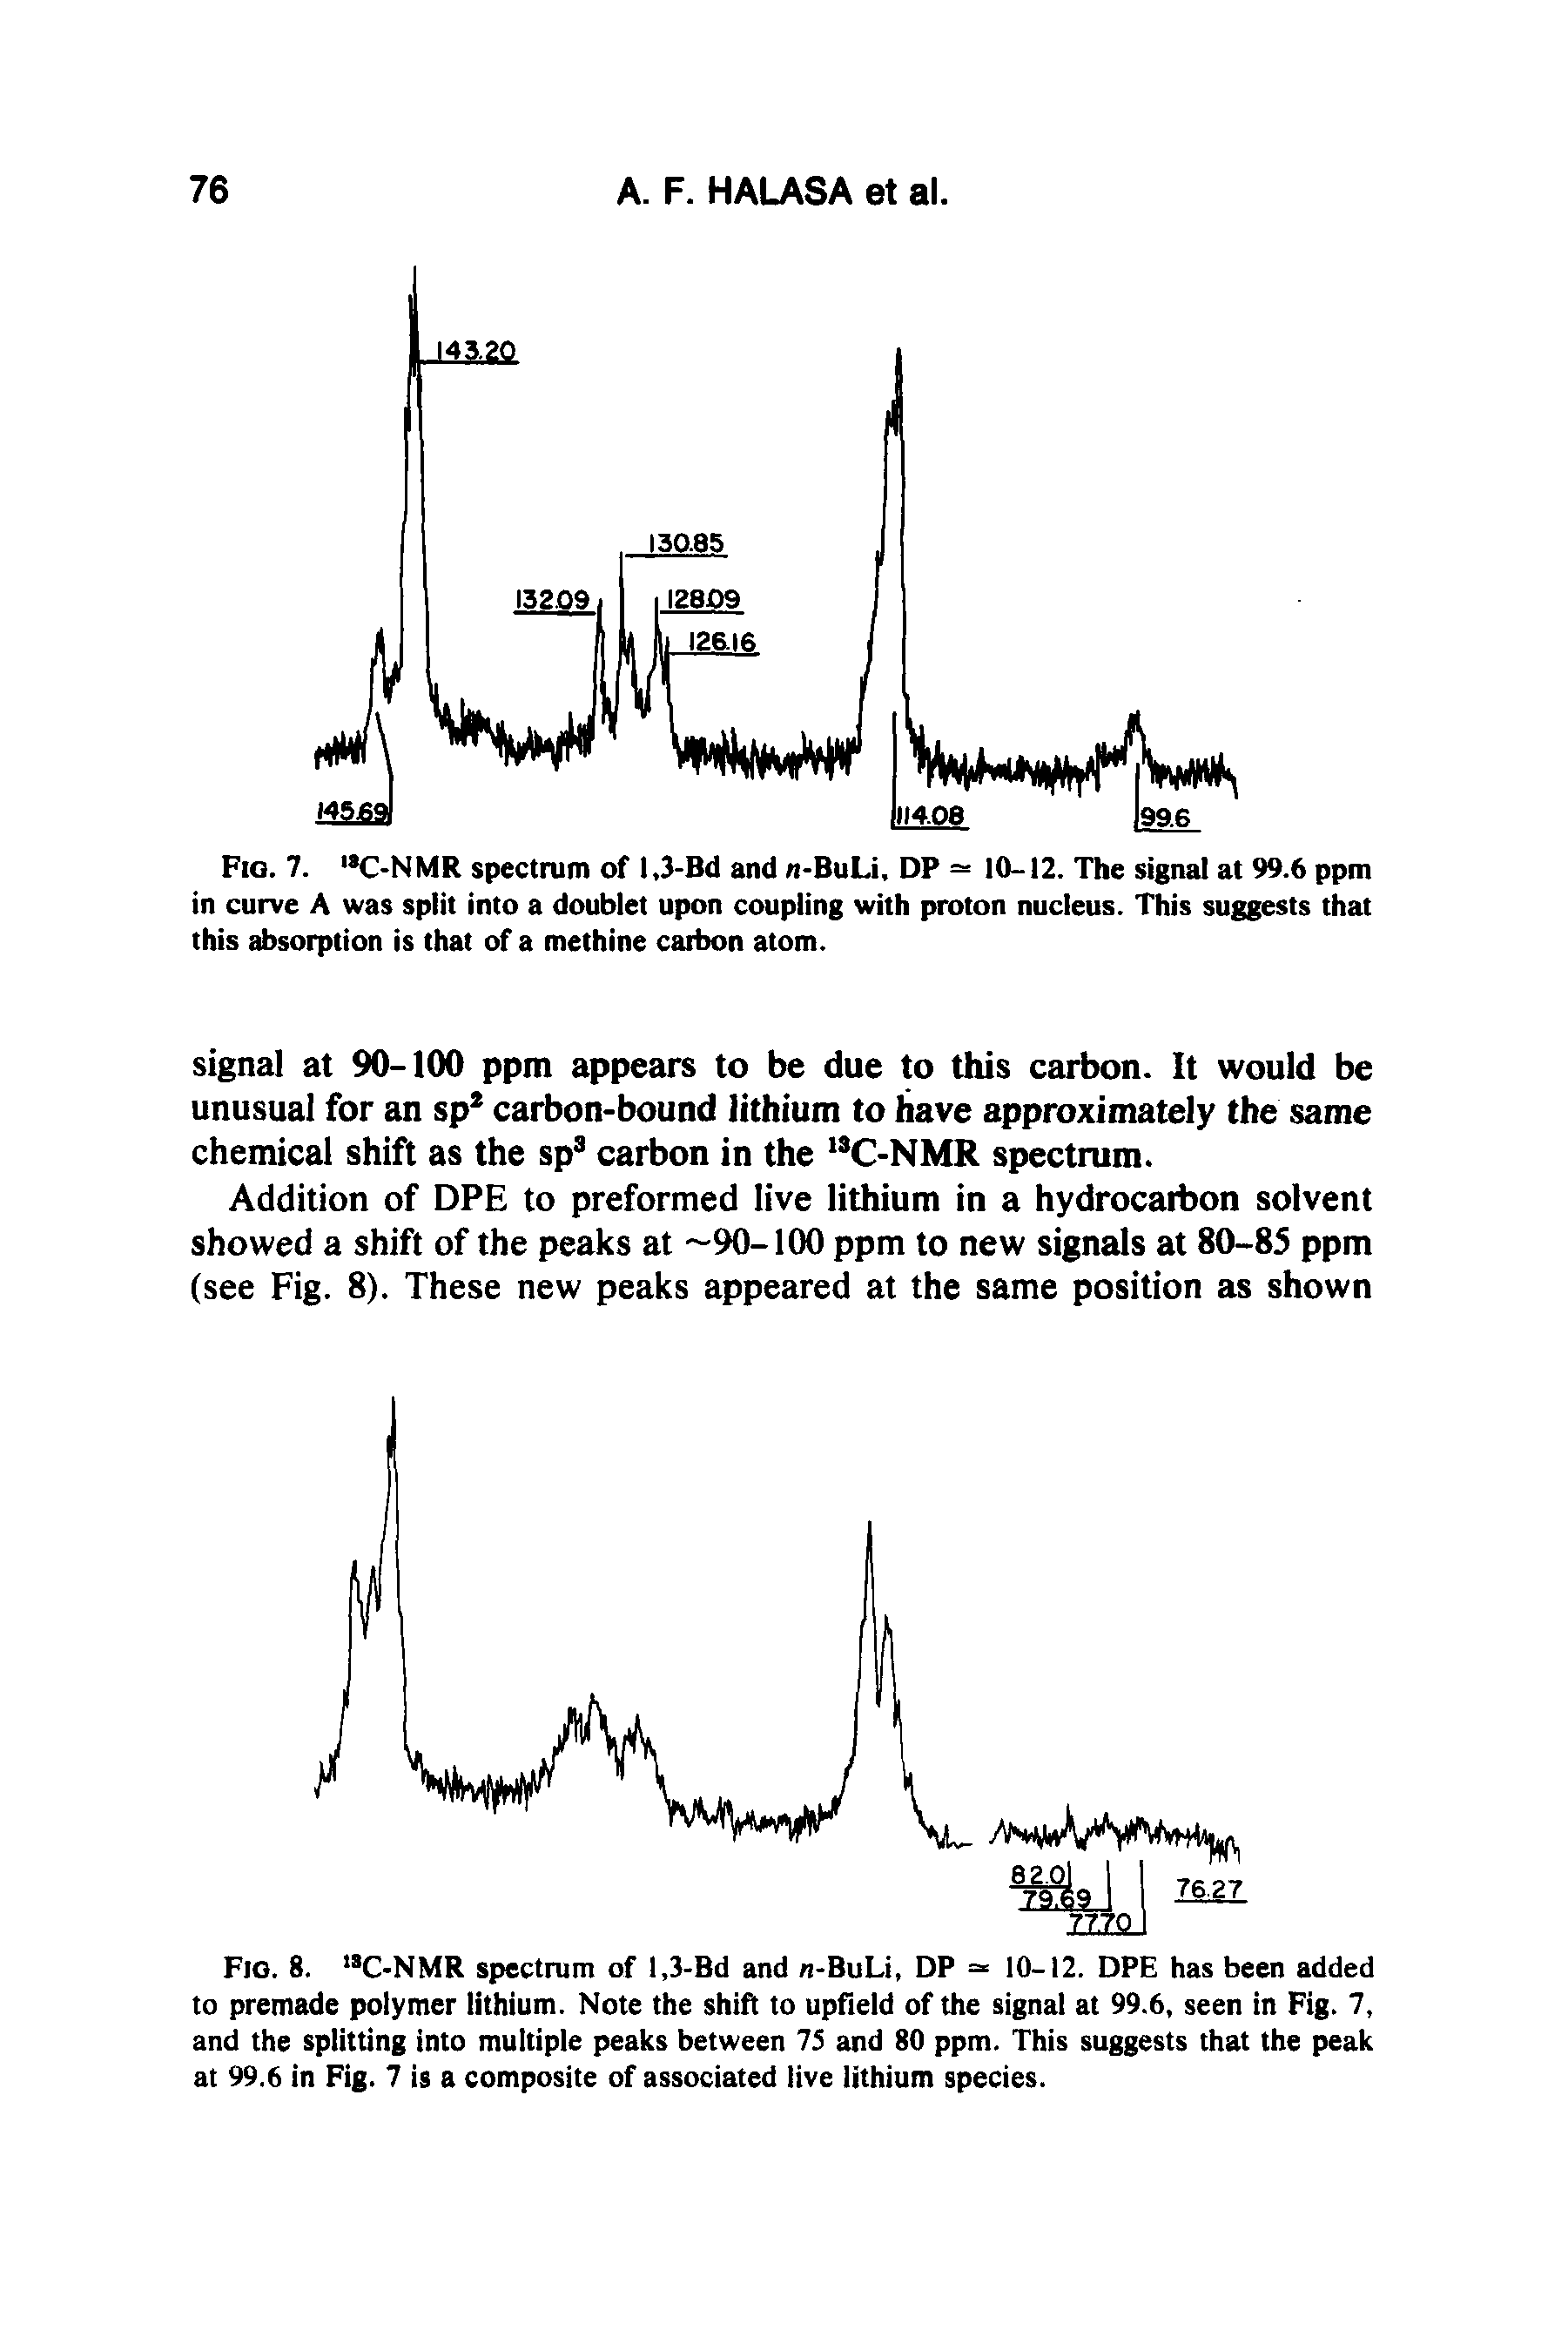 Fig. 7. C-NMR spectrum of 1,3-Bd and n-BuLi, DP — 10-12. The signal at 99.6 ppm in curve A was split into a doublet upon coupling with proton nucleus. This suggests that this absorption is that of a methine carbon atom.